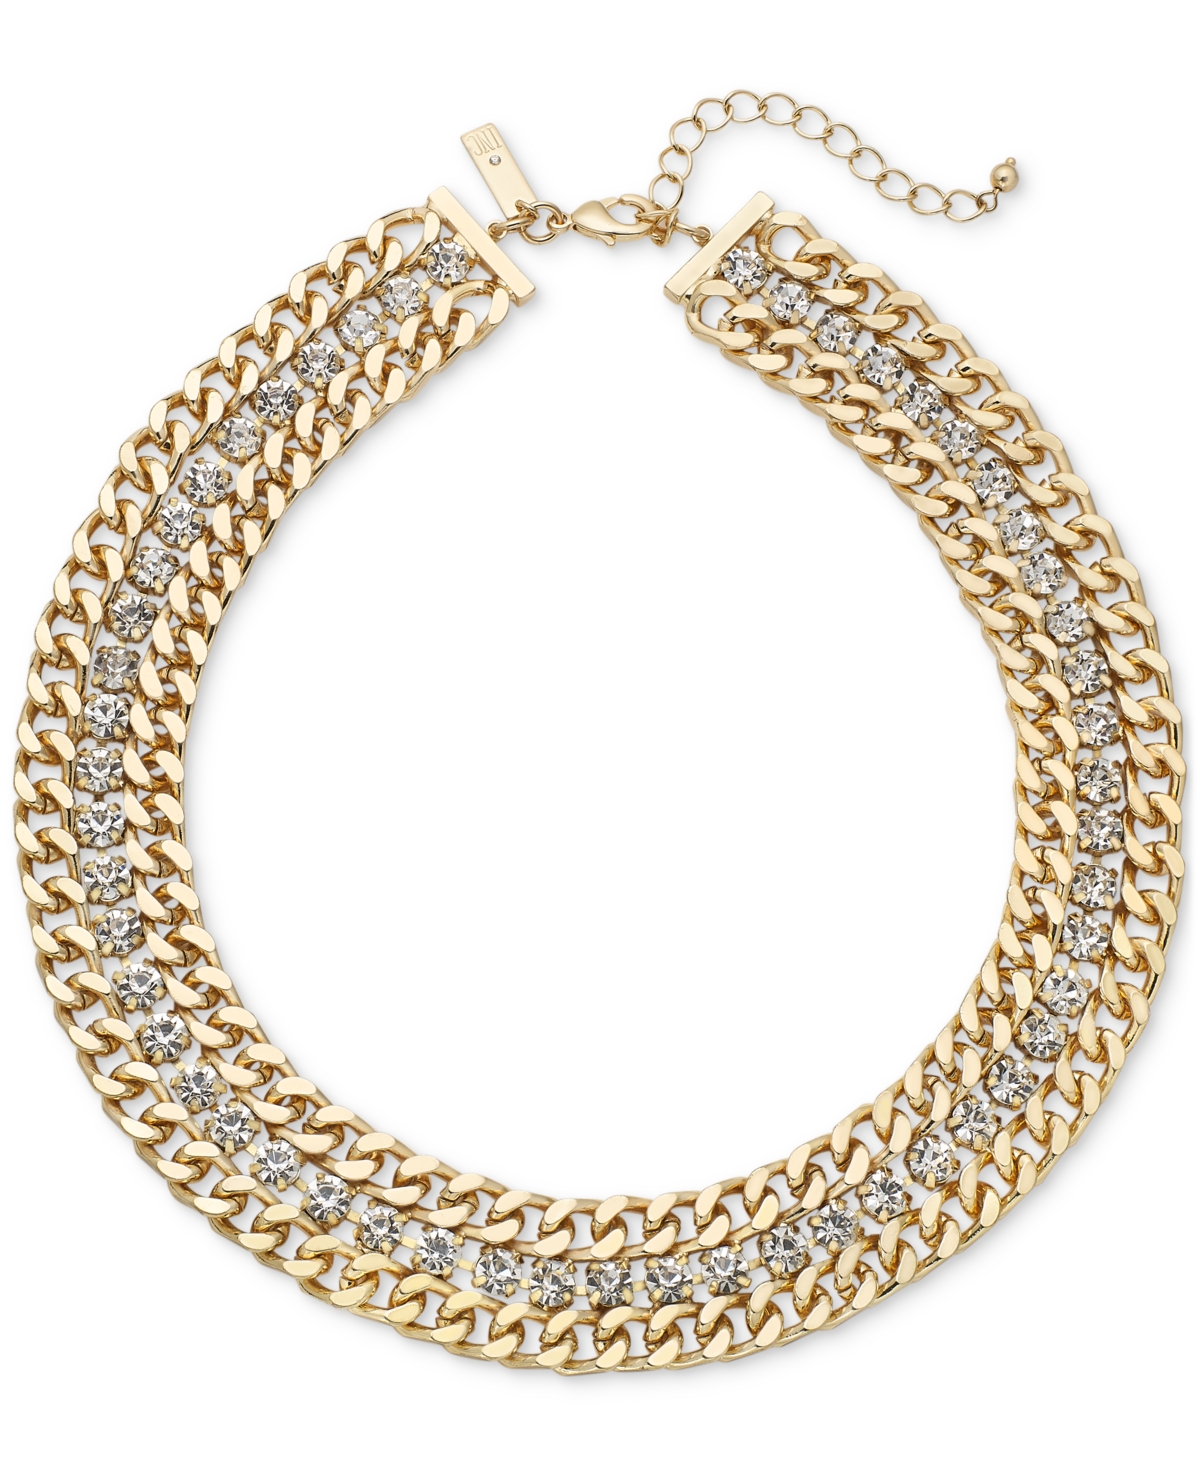 Two-Tone Crystal Necklace, 17" + 3" extender, Created for Macy's - Gold